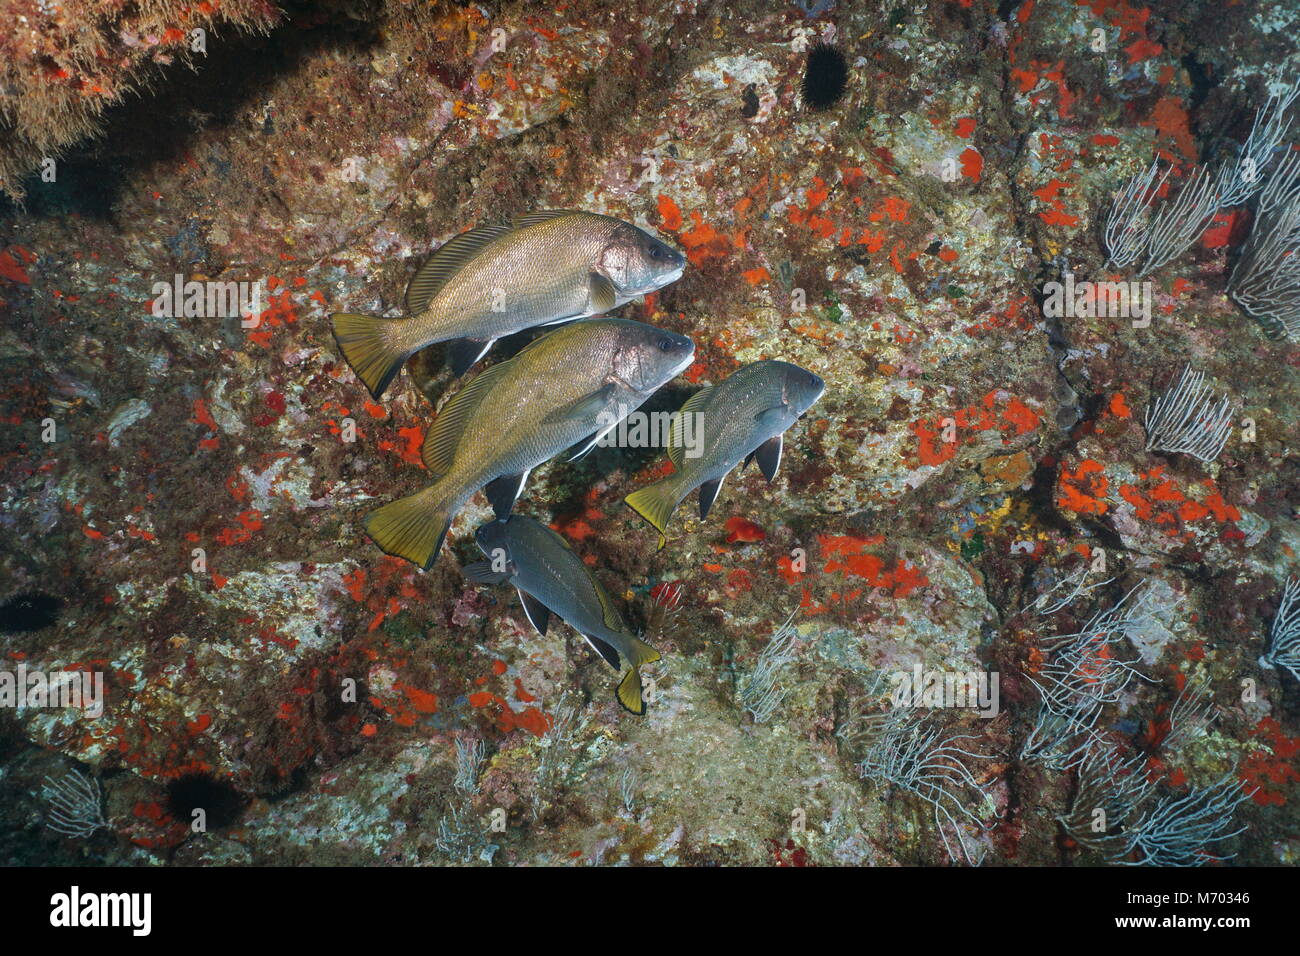 Several brown meagre fish, Sciaena umbra, underwater in the marine reserve of Cerbere Banyuls, Mediterranean sea, Pyrenees-Orientales, France Stock Photo